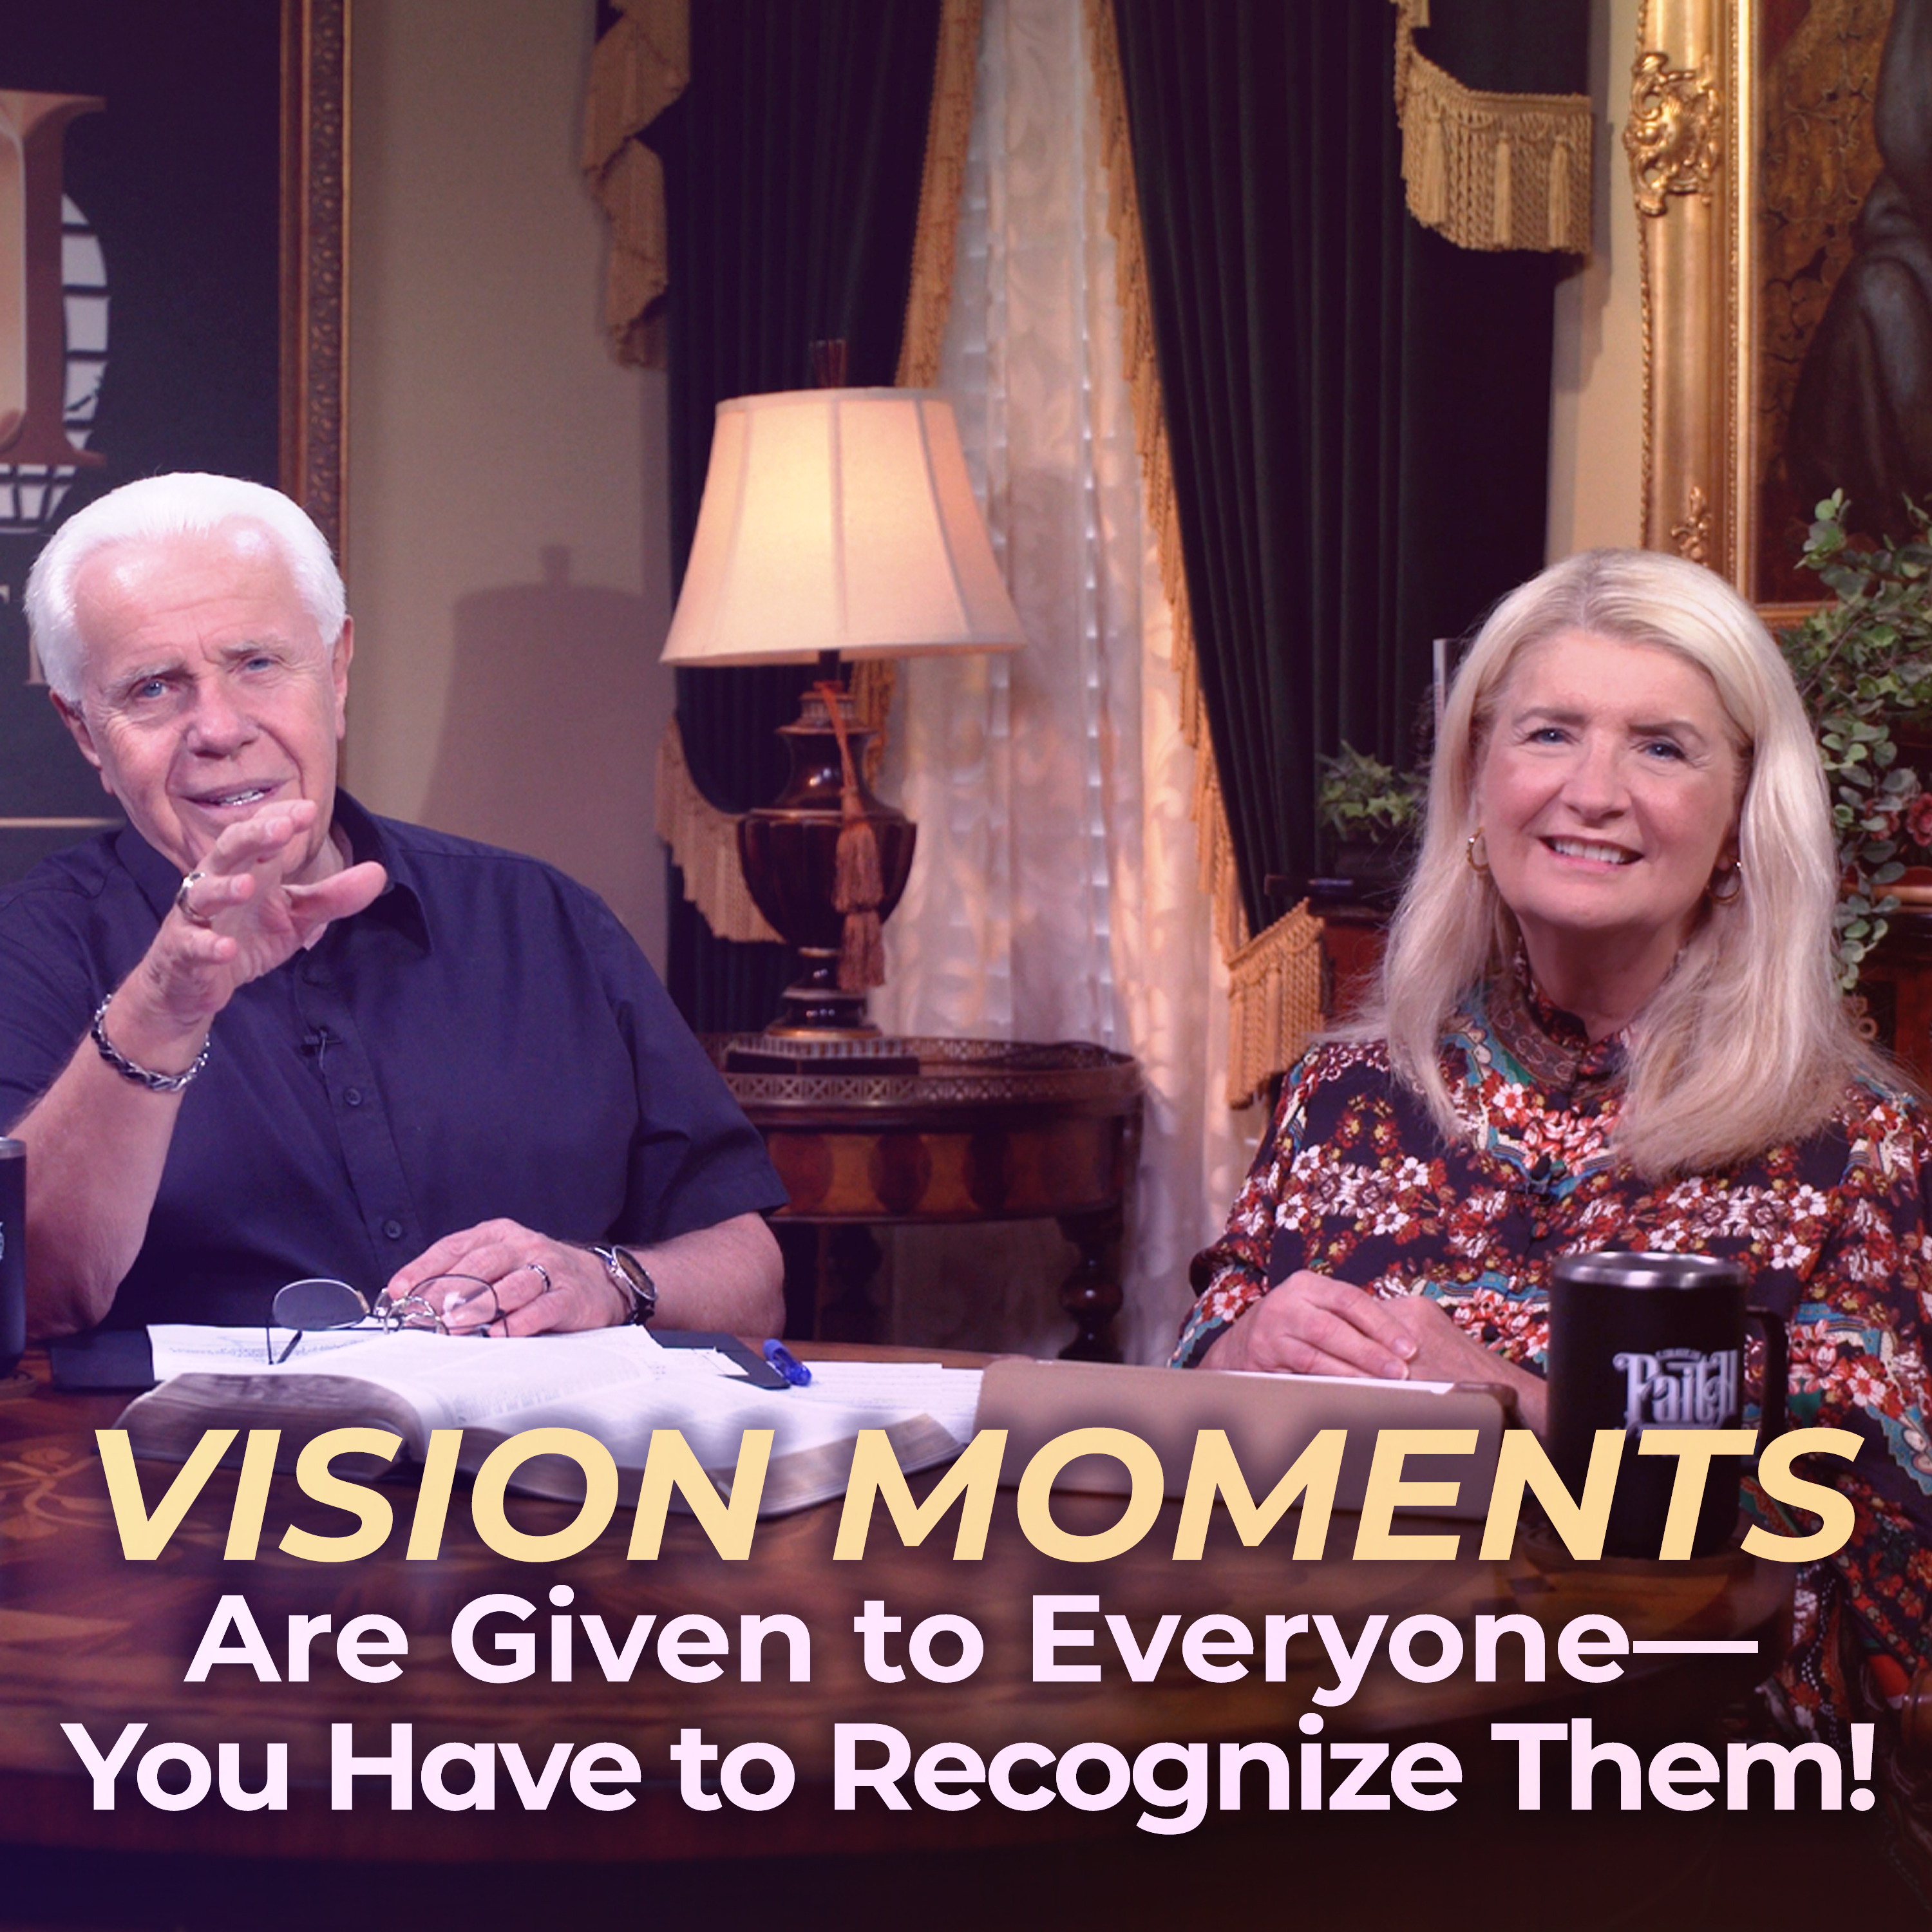 Vision Moments Are Given to Everyone—You Have to Recognize Them!